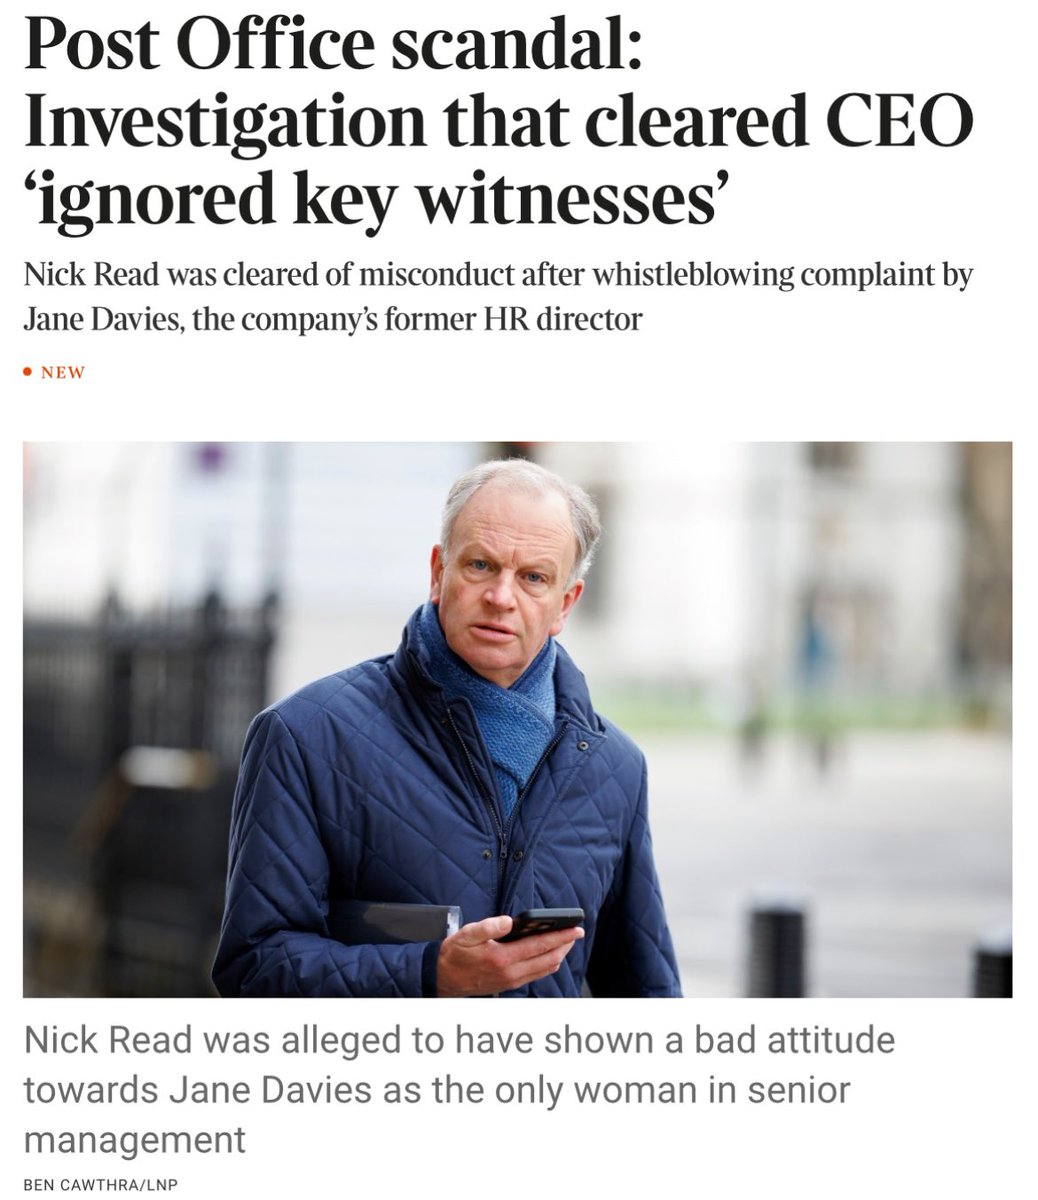 #PostOfficeScandal Latest piece by @TomWitherow in @thetimes Investigation that cleared @PostOffice CEO Nick Read ‘ignored key witnesses’ An investigation into the Post Office chief executive did not interview the complainant’s key witnesses and kept her in the dark, MPs have…